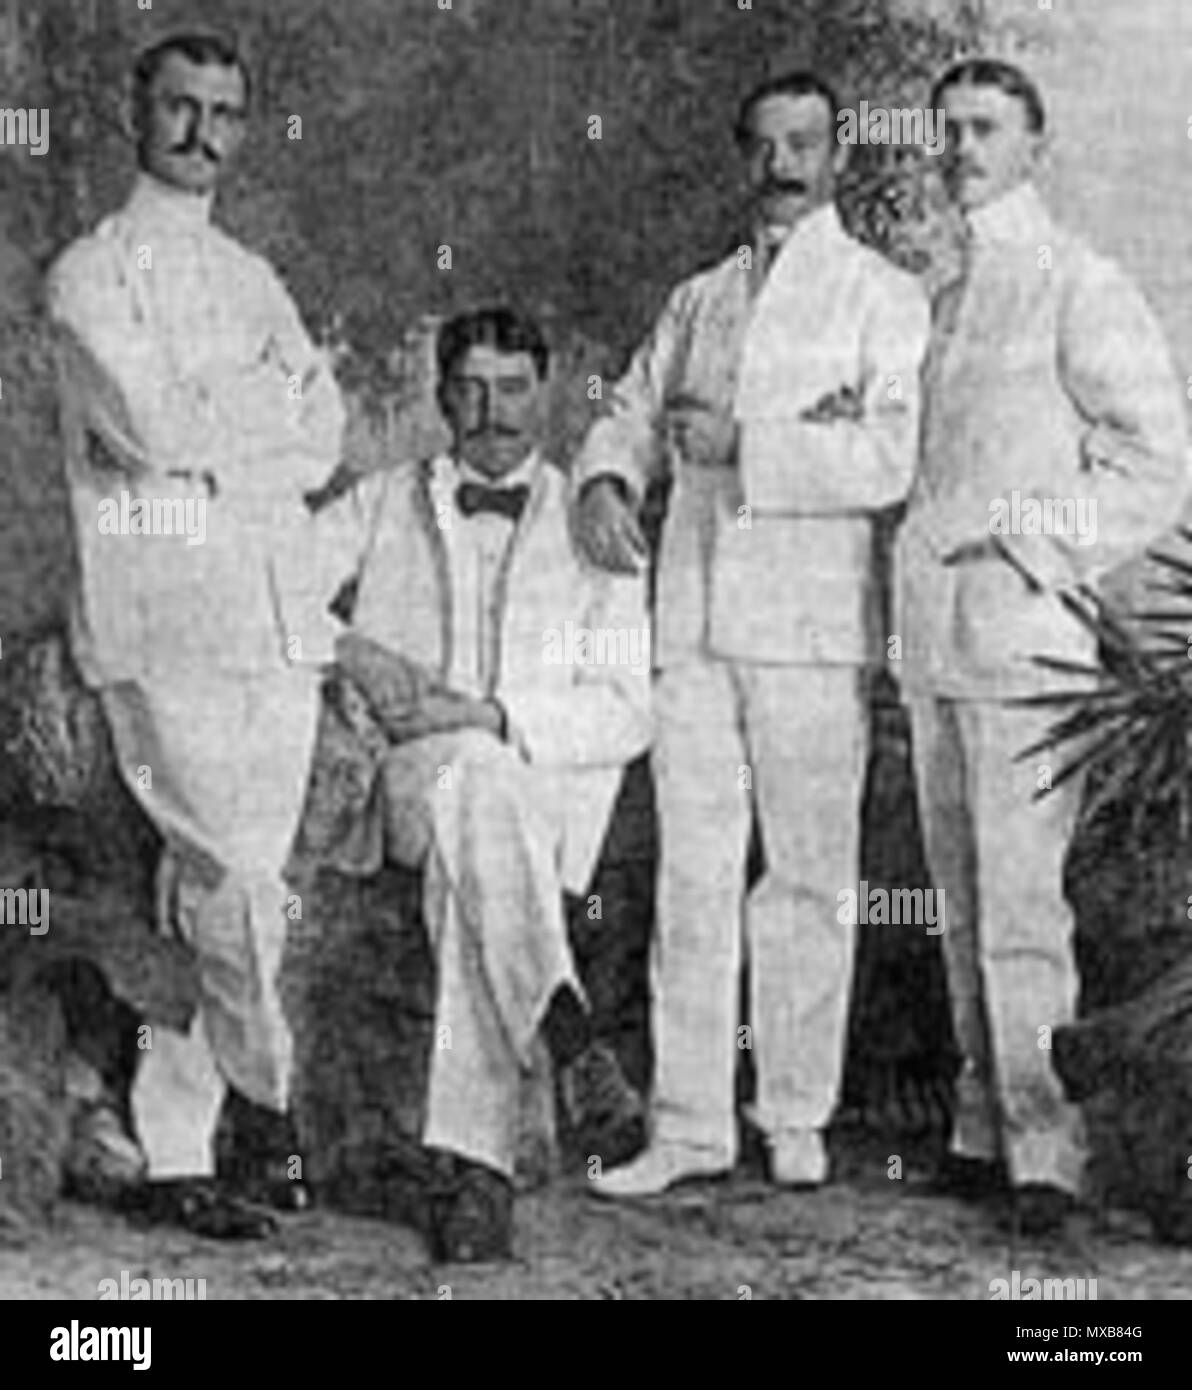 . English: Explorers and ethnographers Hiram M. Hiller, Jr. (far left), William H. Furness, III, and Alfred C. Harrison, Jr., along with Lewis Etzel, Furness' assistant. Sources appear to differ as to whether Furness or Etzel is seated. Photographed 1898 in Singapore. NOTE: The University of Pennsylvania Museum of Archaeology and Anthropology lists the figures as (left to right): Hiller, Etzel (seated), Furness, Harrison.[1] Français : Hiller (à gauche), Furness et Harrison, en compagnie de Lewis Etzel, l'assistant de Furness. Photographie prise à Singapour en1898 . 1898. Unknown 279 Hiller-Fu Stock Photo